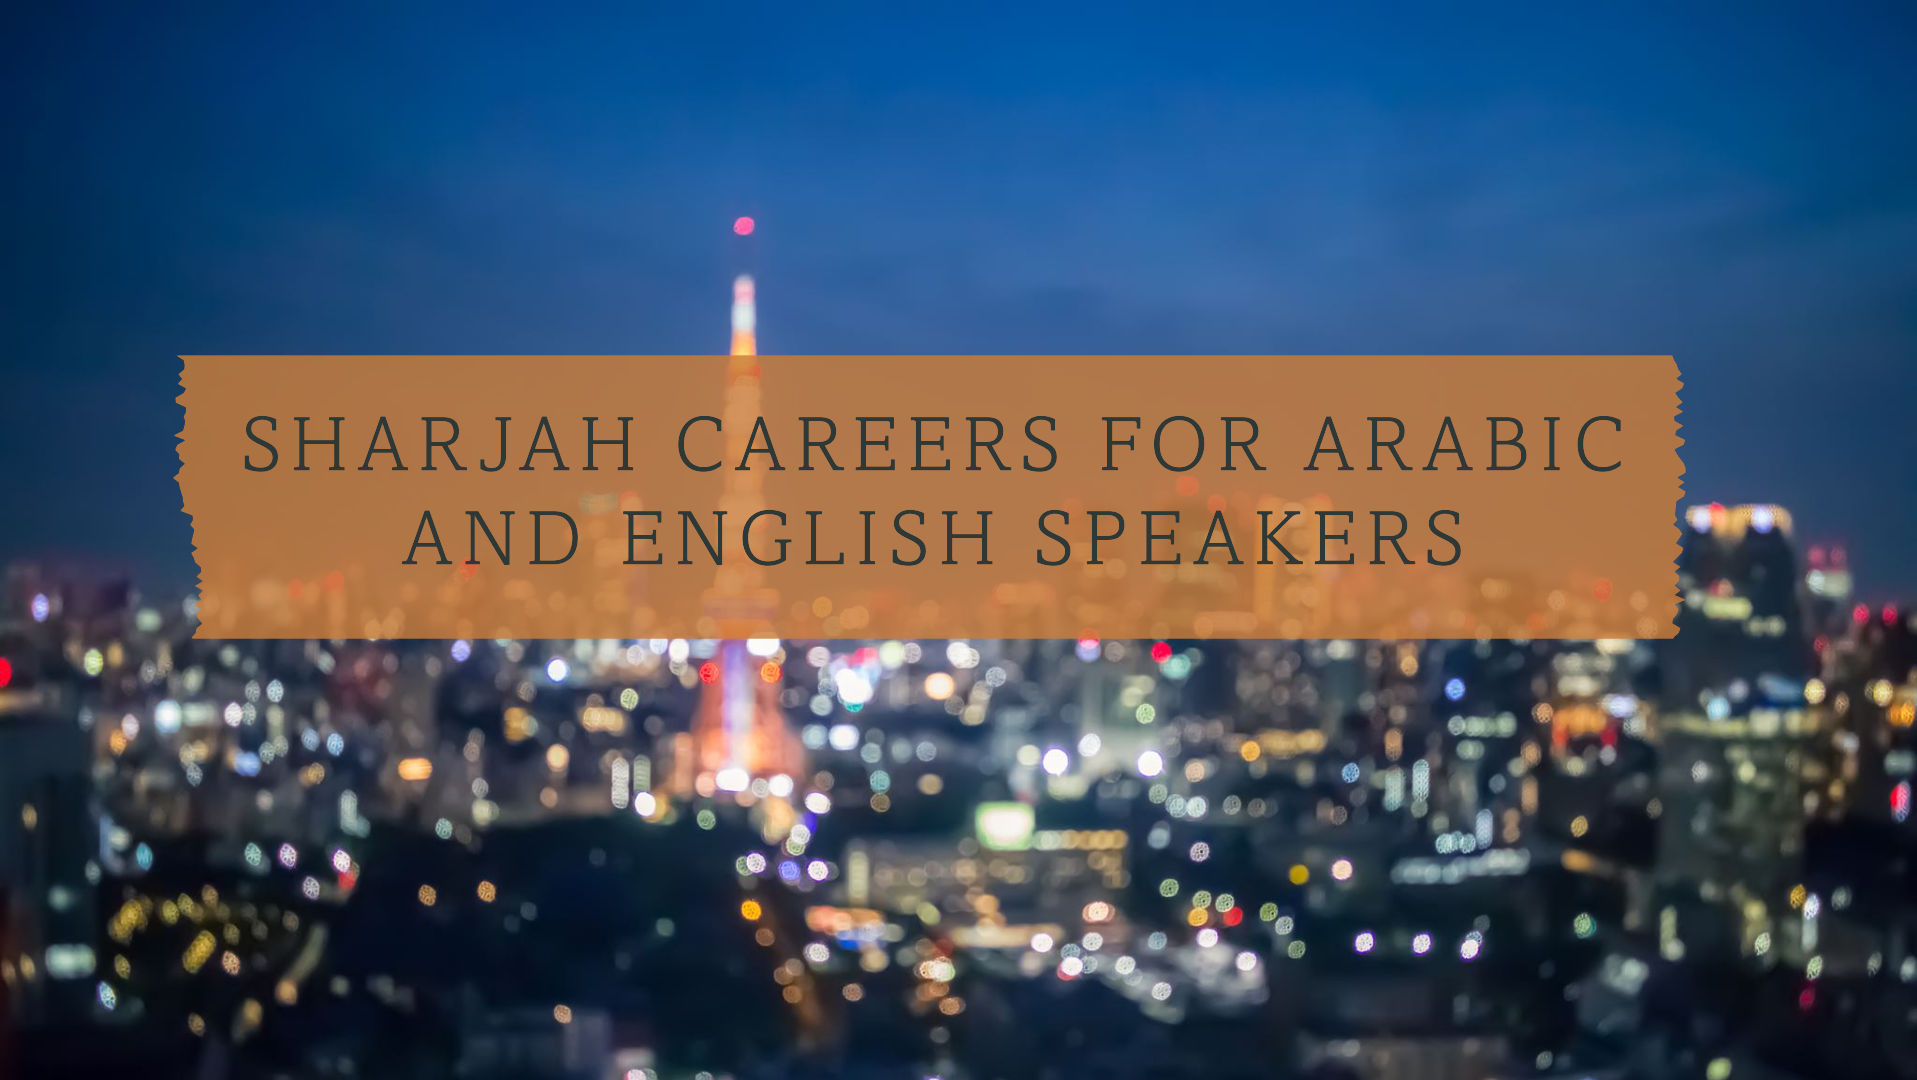 Sharjah careers for Arabic and English speakers